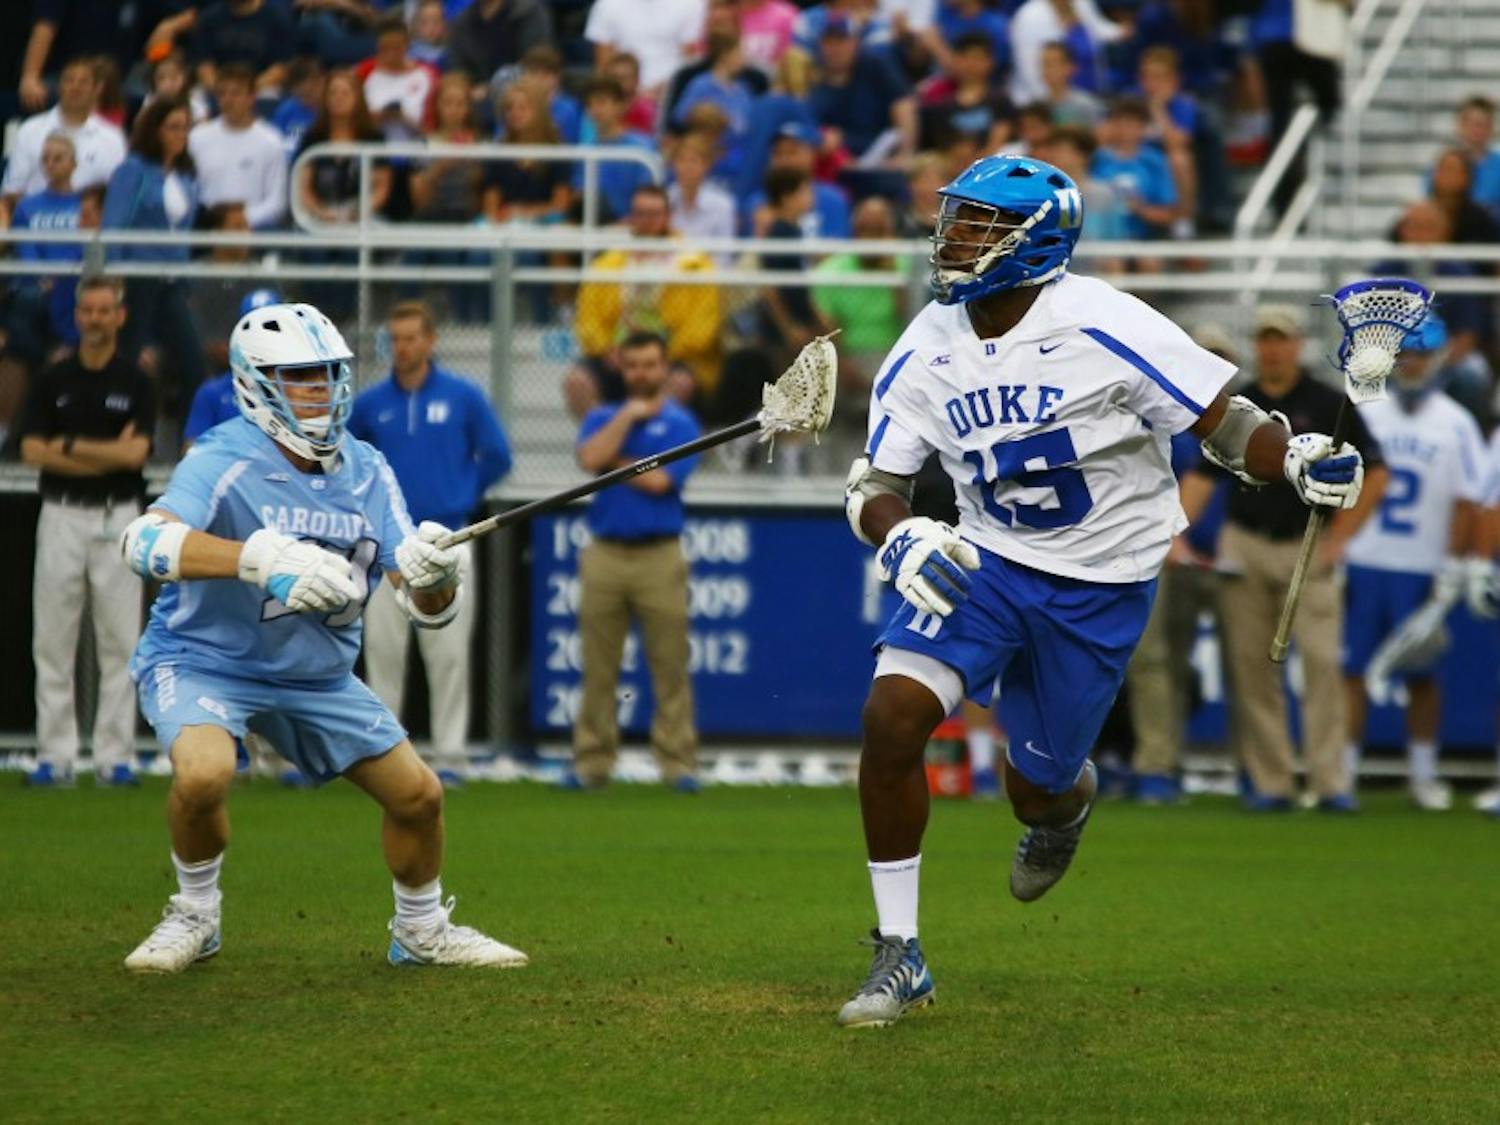 ACC Offensive Player of the Year Myles Jones will look to get Duke's high-powered offense back in gear Sunday.